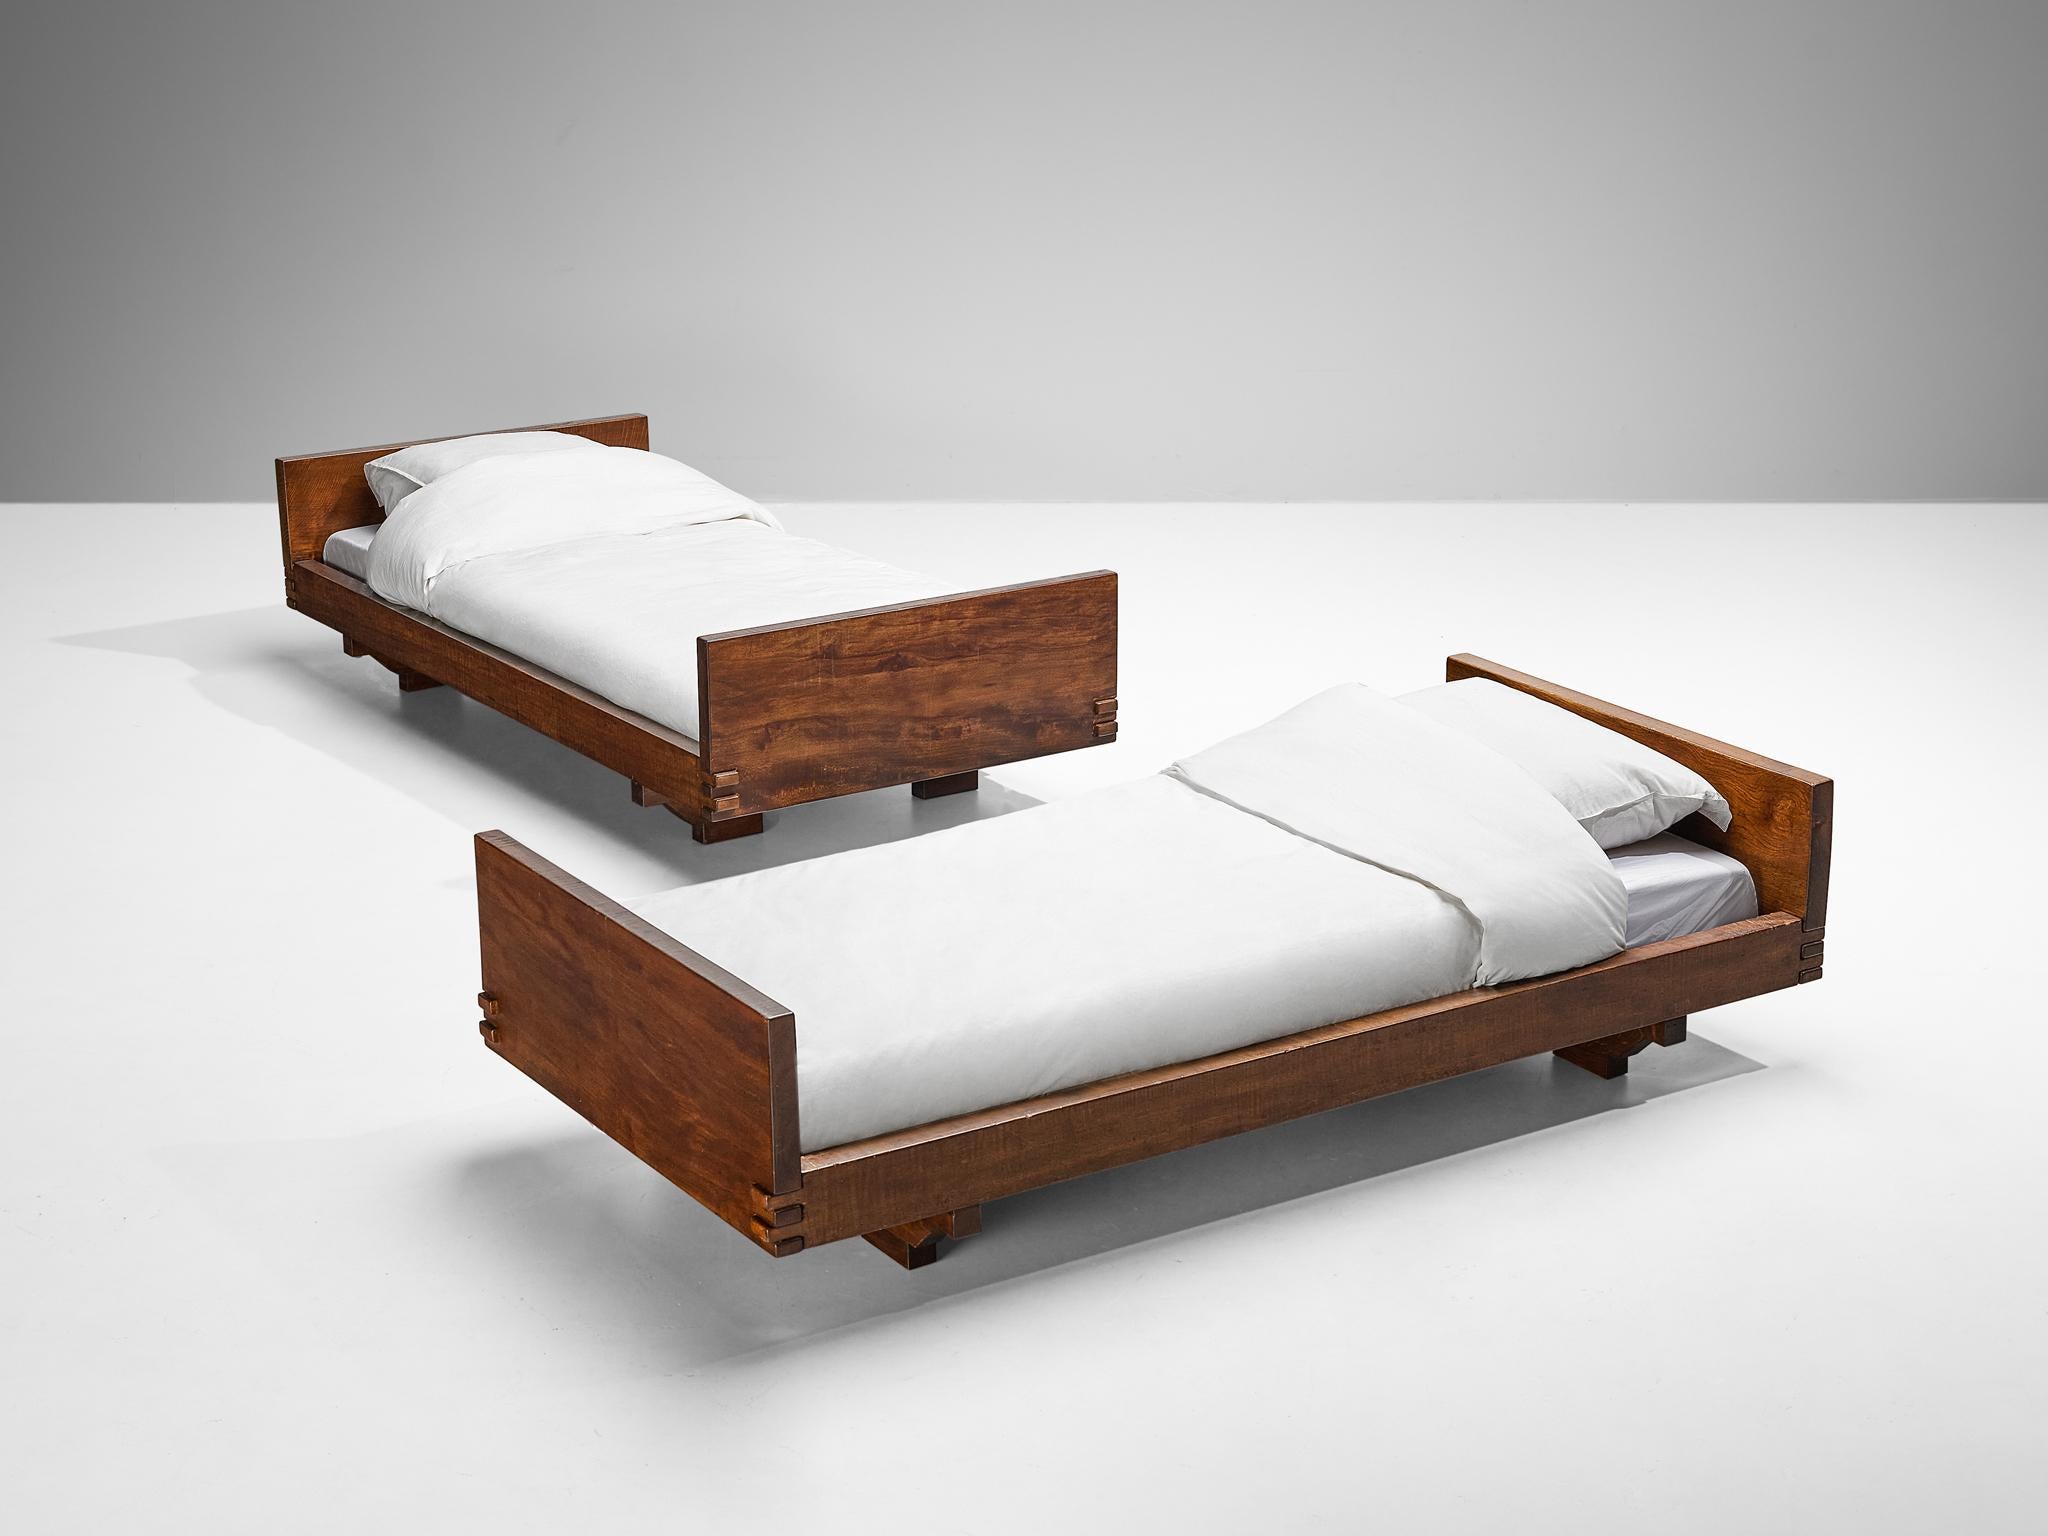 Giuseppe Rivadossi for Officina Rivadossi, beds or daybeds, walnut, oak, Italy, 1980s

Giuseppe Rivadossi once again proves his great eye for materialization and technicality these beds are exemplary for. The pair is constructed using wooden panels